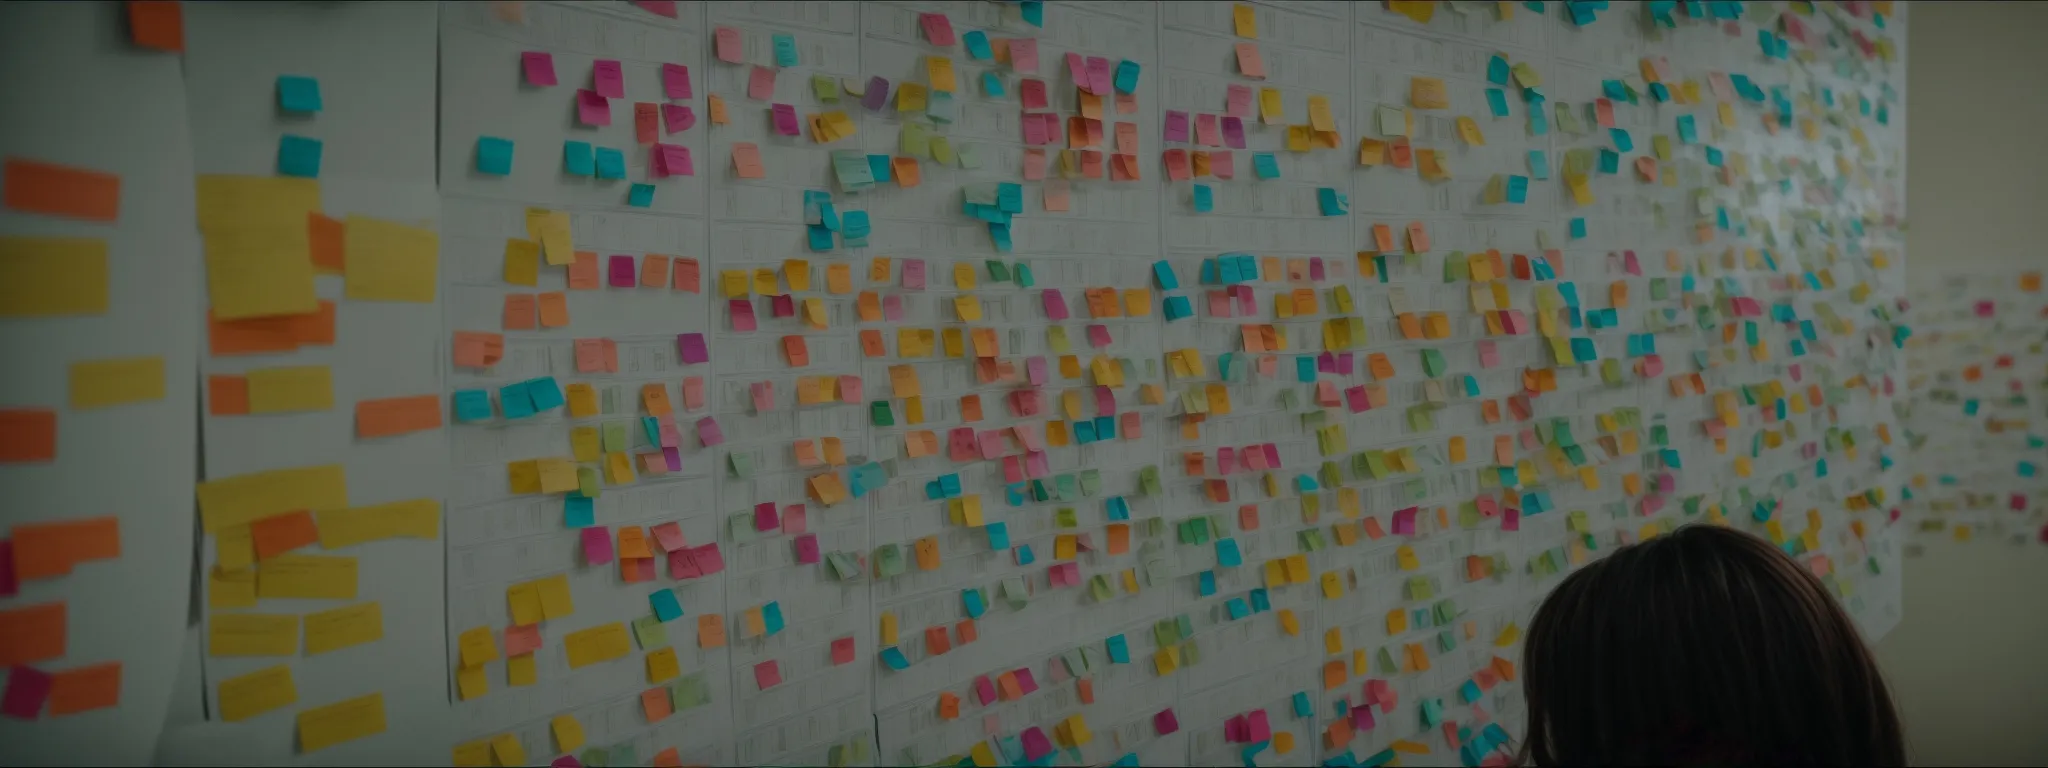 a person thoughtfully organizing color-coded index cards on a large board to display a clear, structured layout.